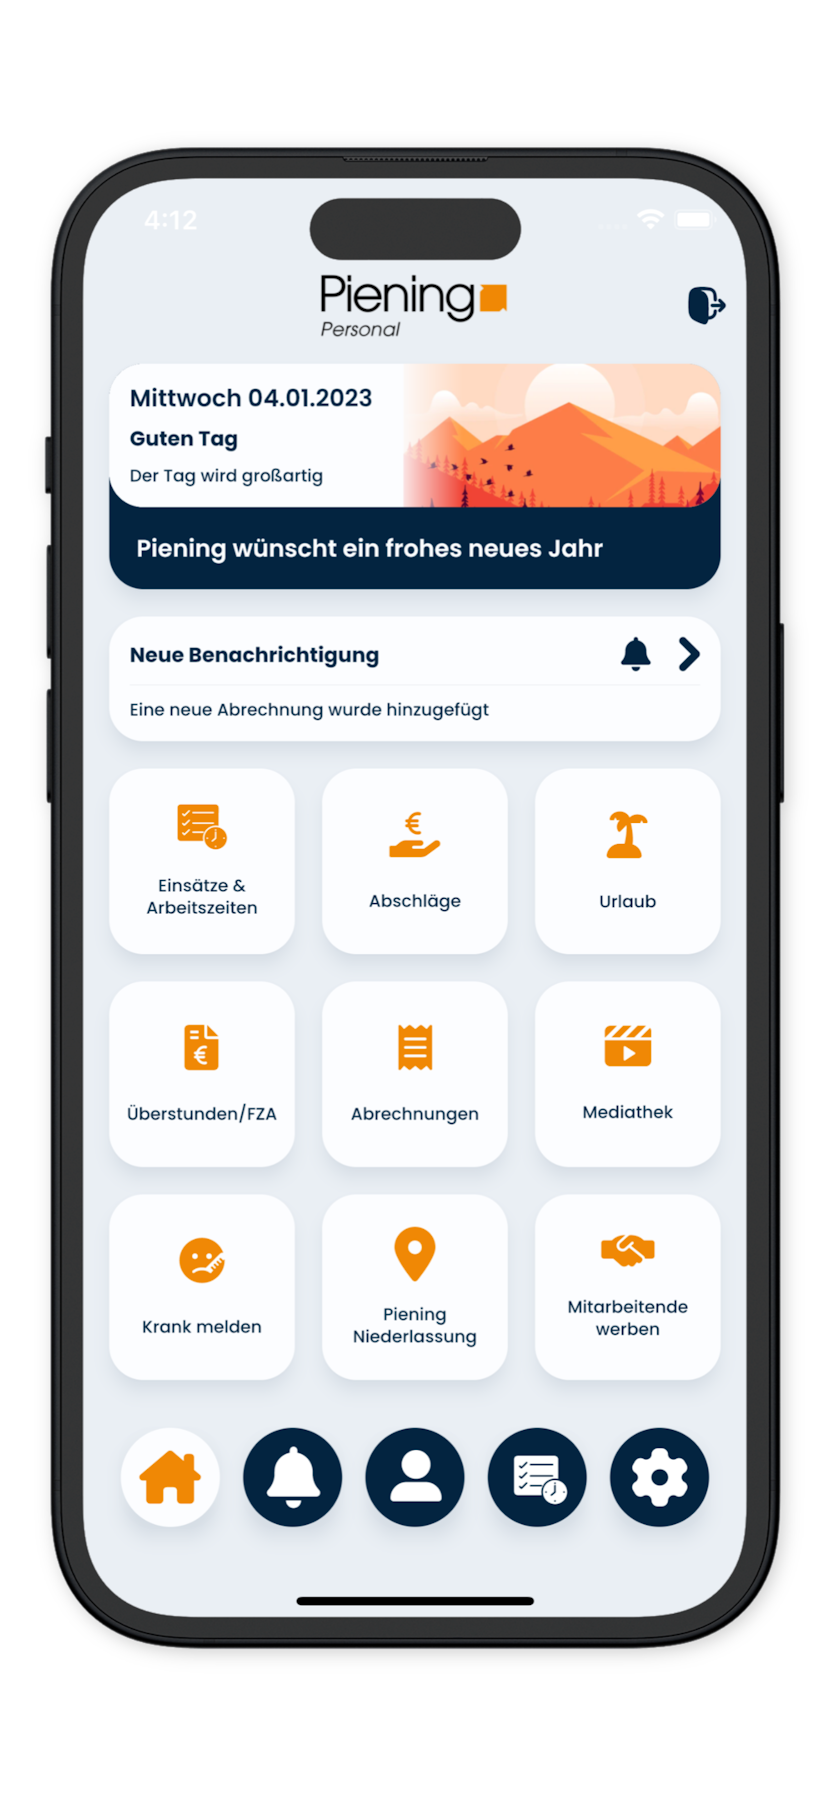 Piening Connect App Design: Home Screen